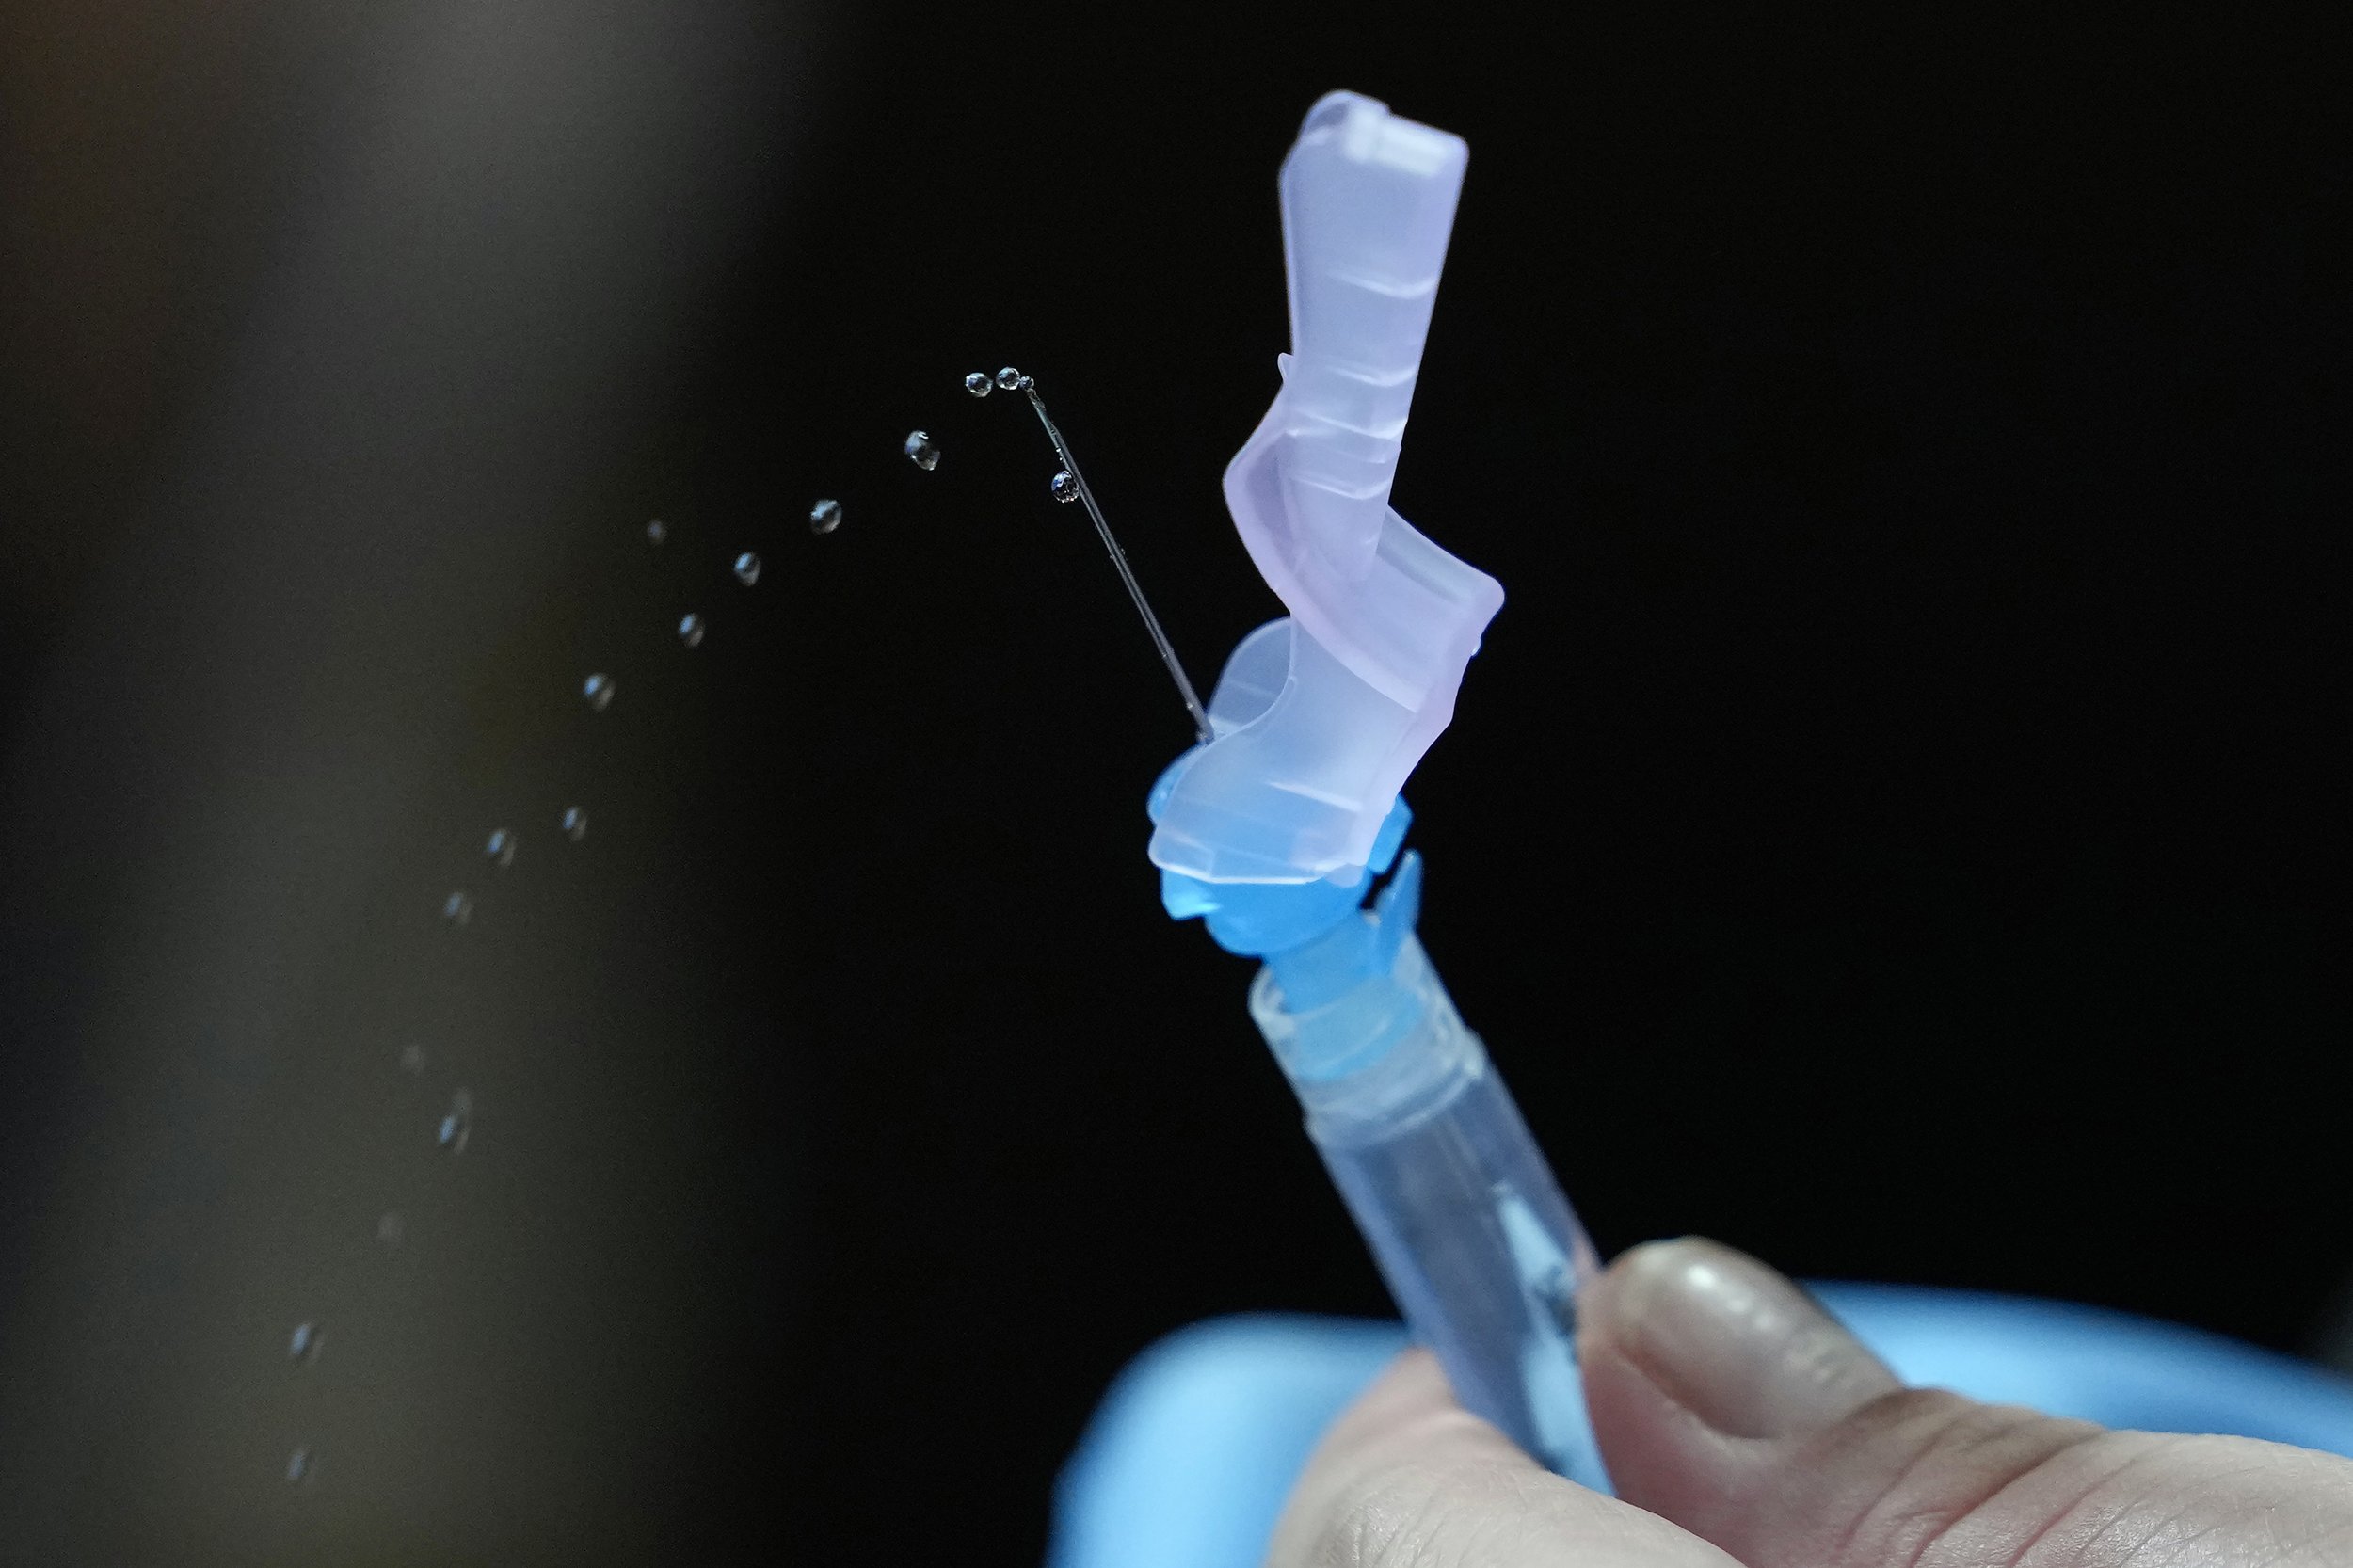  A health worker prepares Pfizer's COVID-19 vaccine at the National Kidney and Transplant Institute in Quezon City, Philippines, on Nov. 17, 2021. (AP Photo/Aaron Favila) 